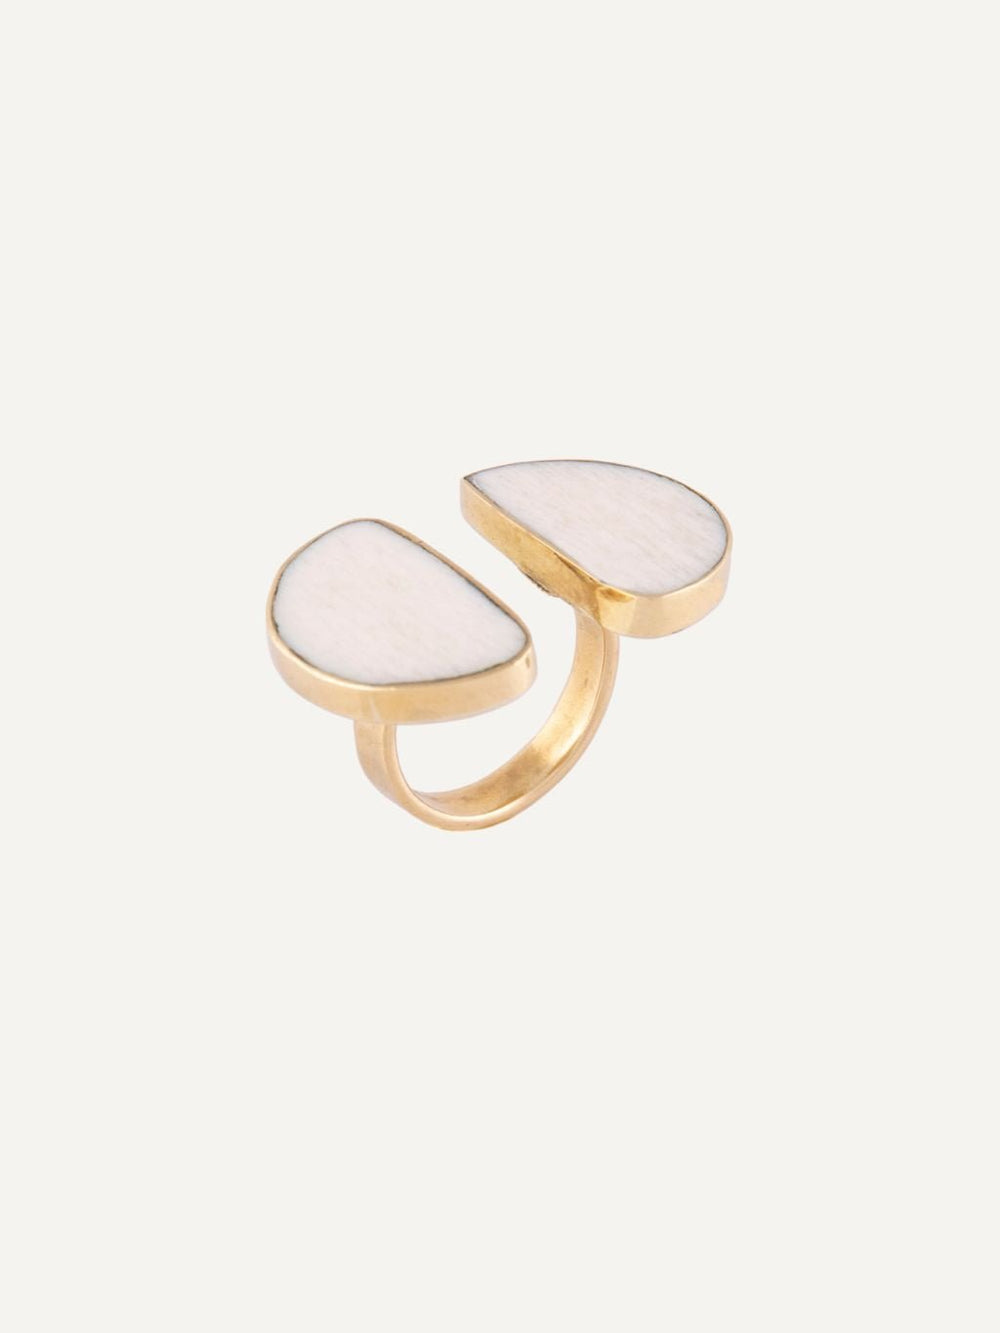 Best Selling Kenyan Brand, Gold Plated White Bupe Ring By Lamu Jewelry.